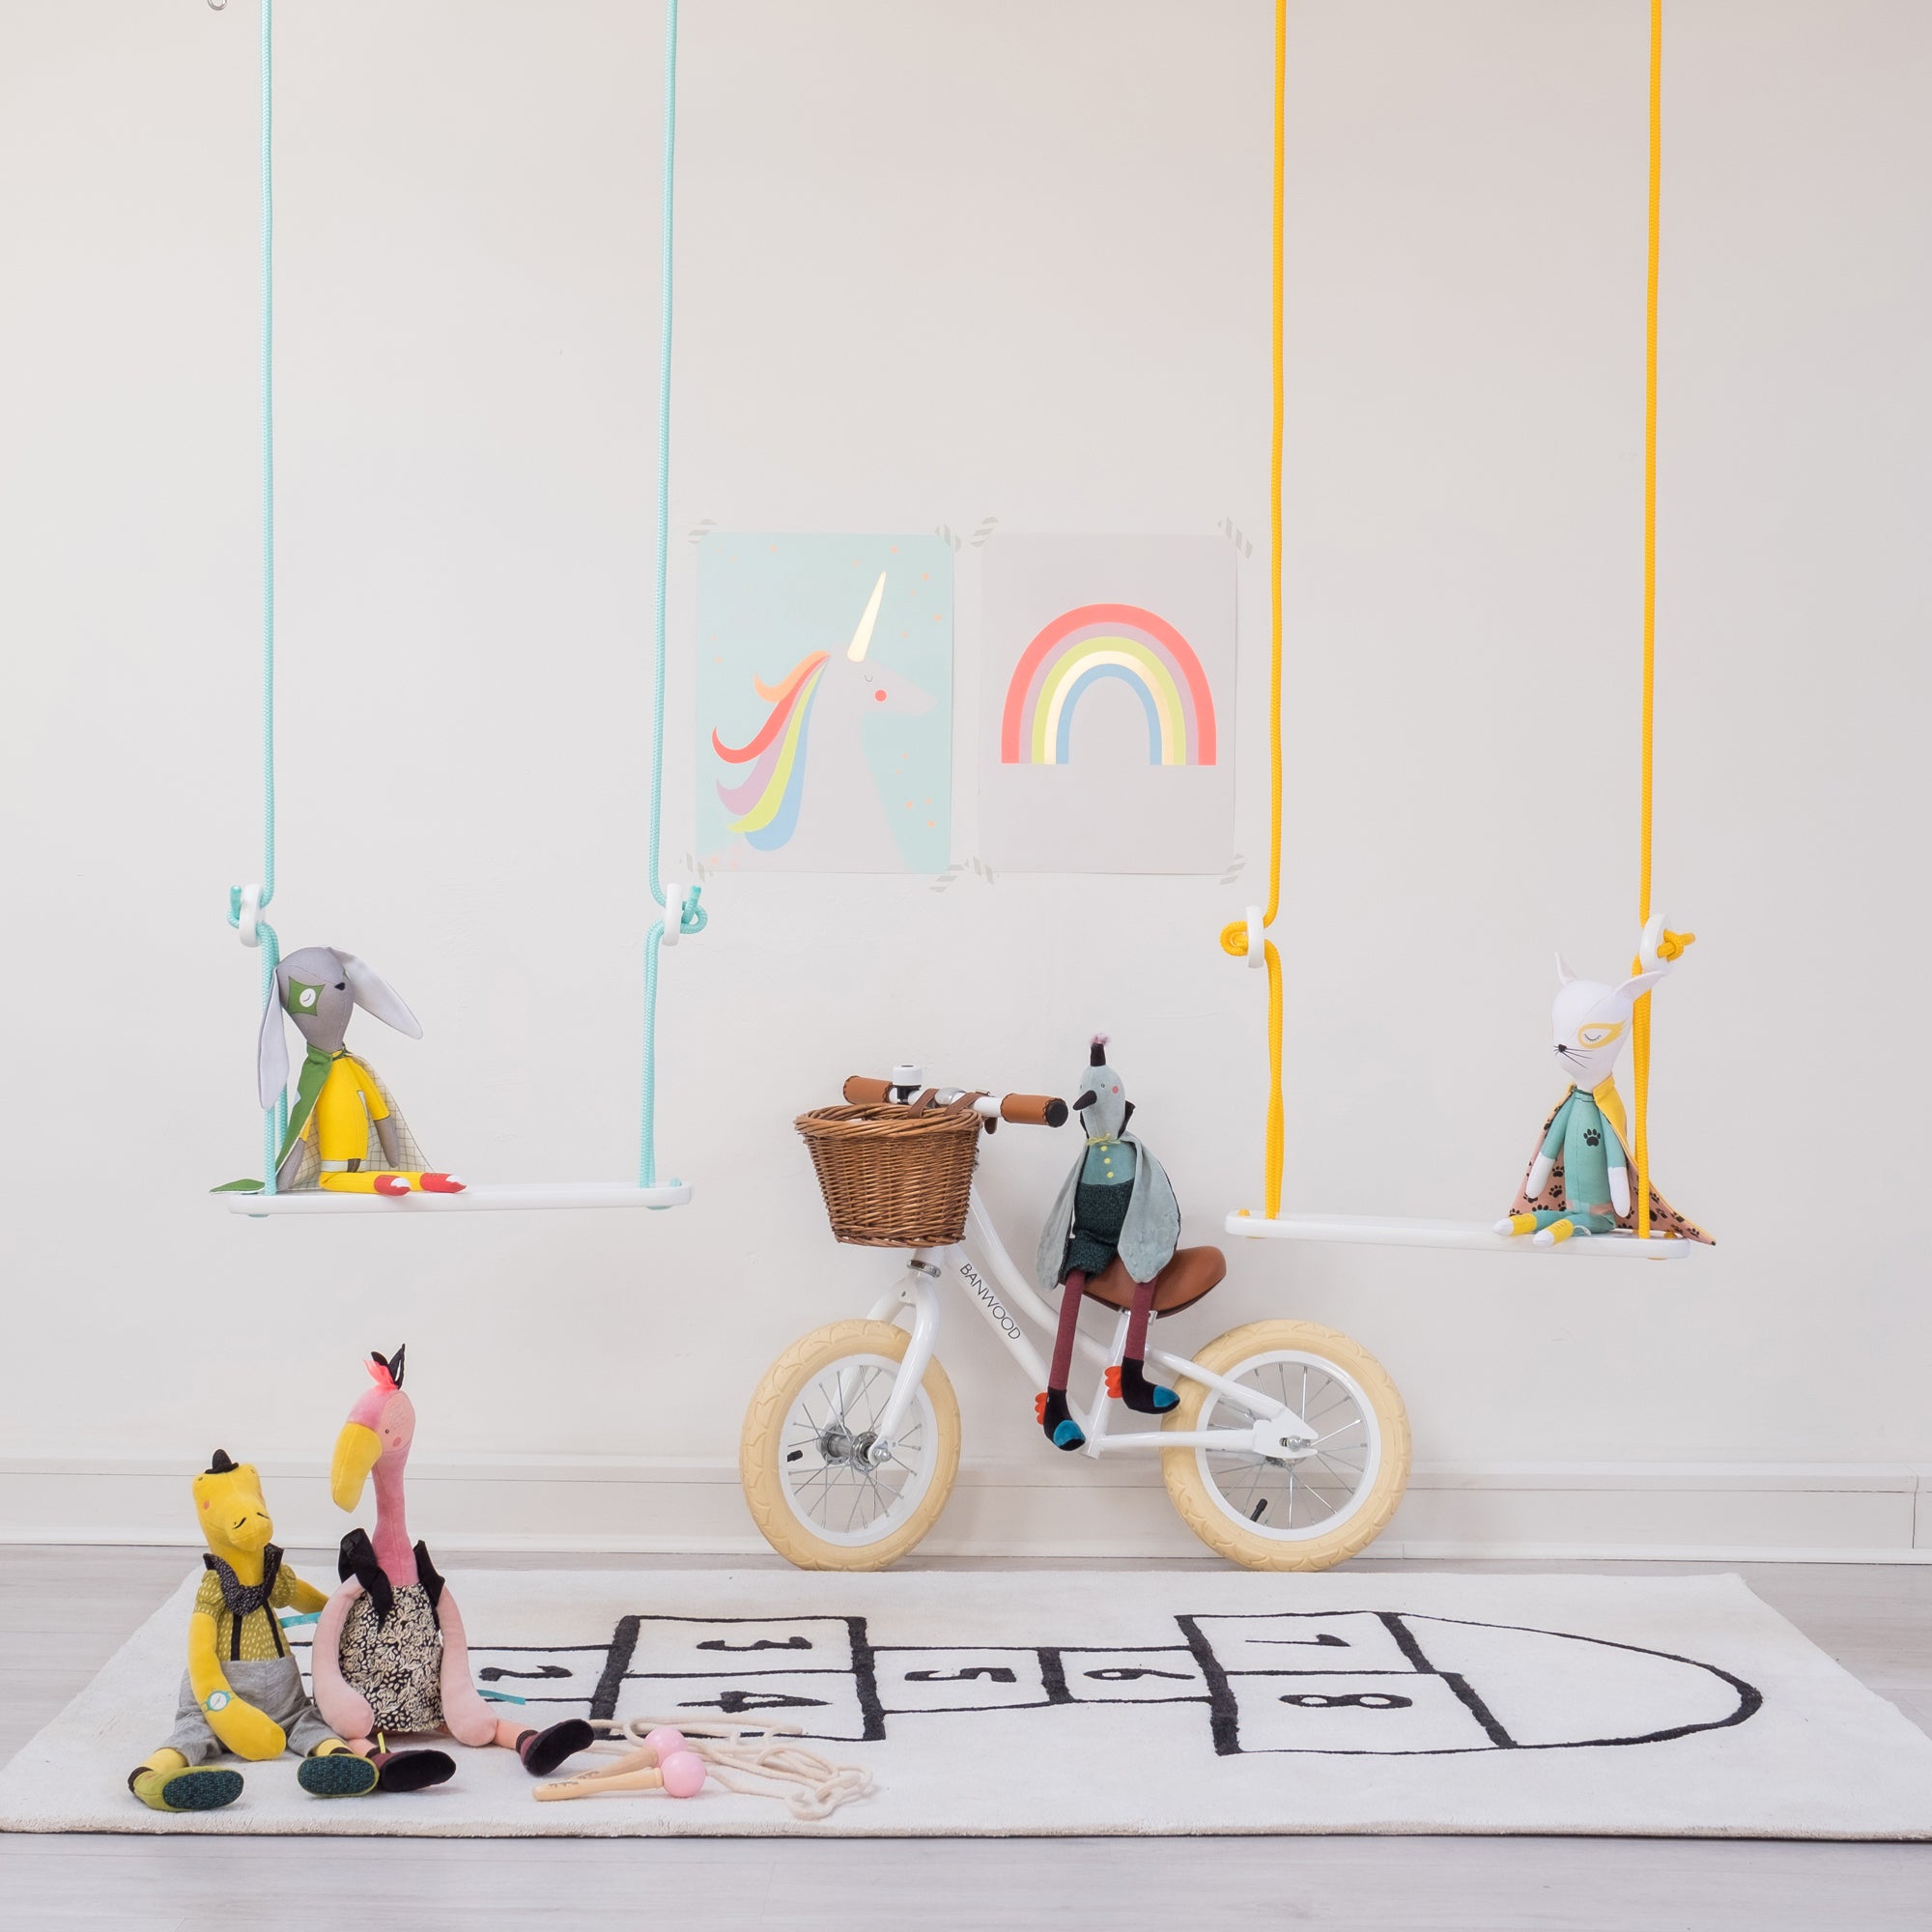 Toys and children's bedroom accessories, available at Bobby Rabbit.